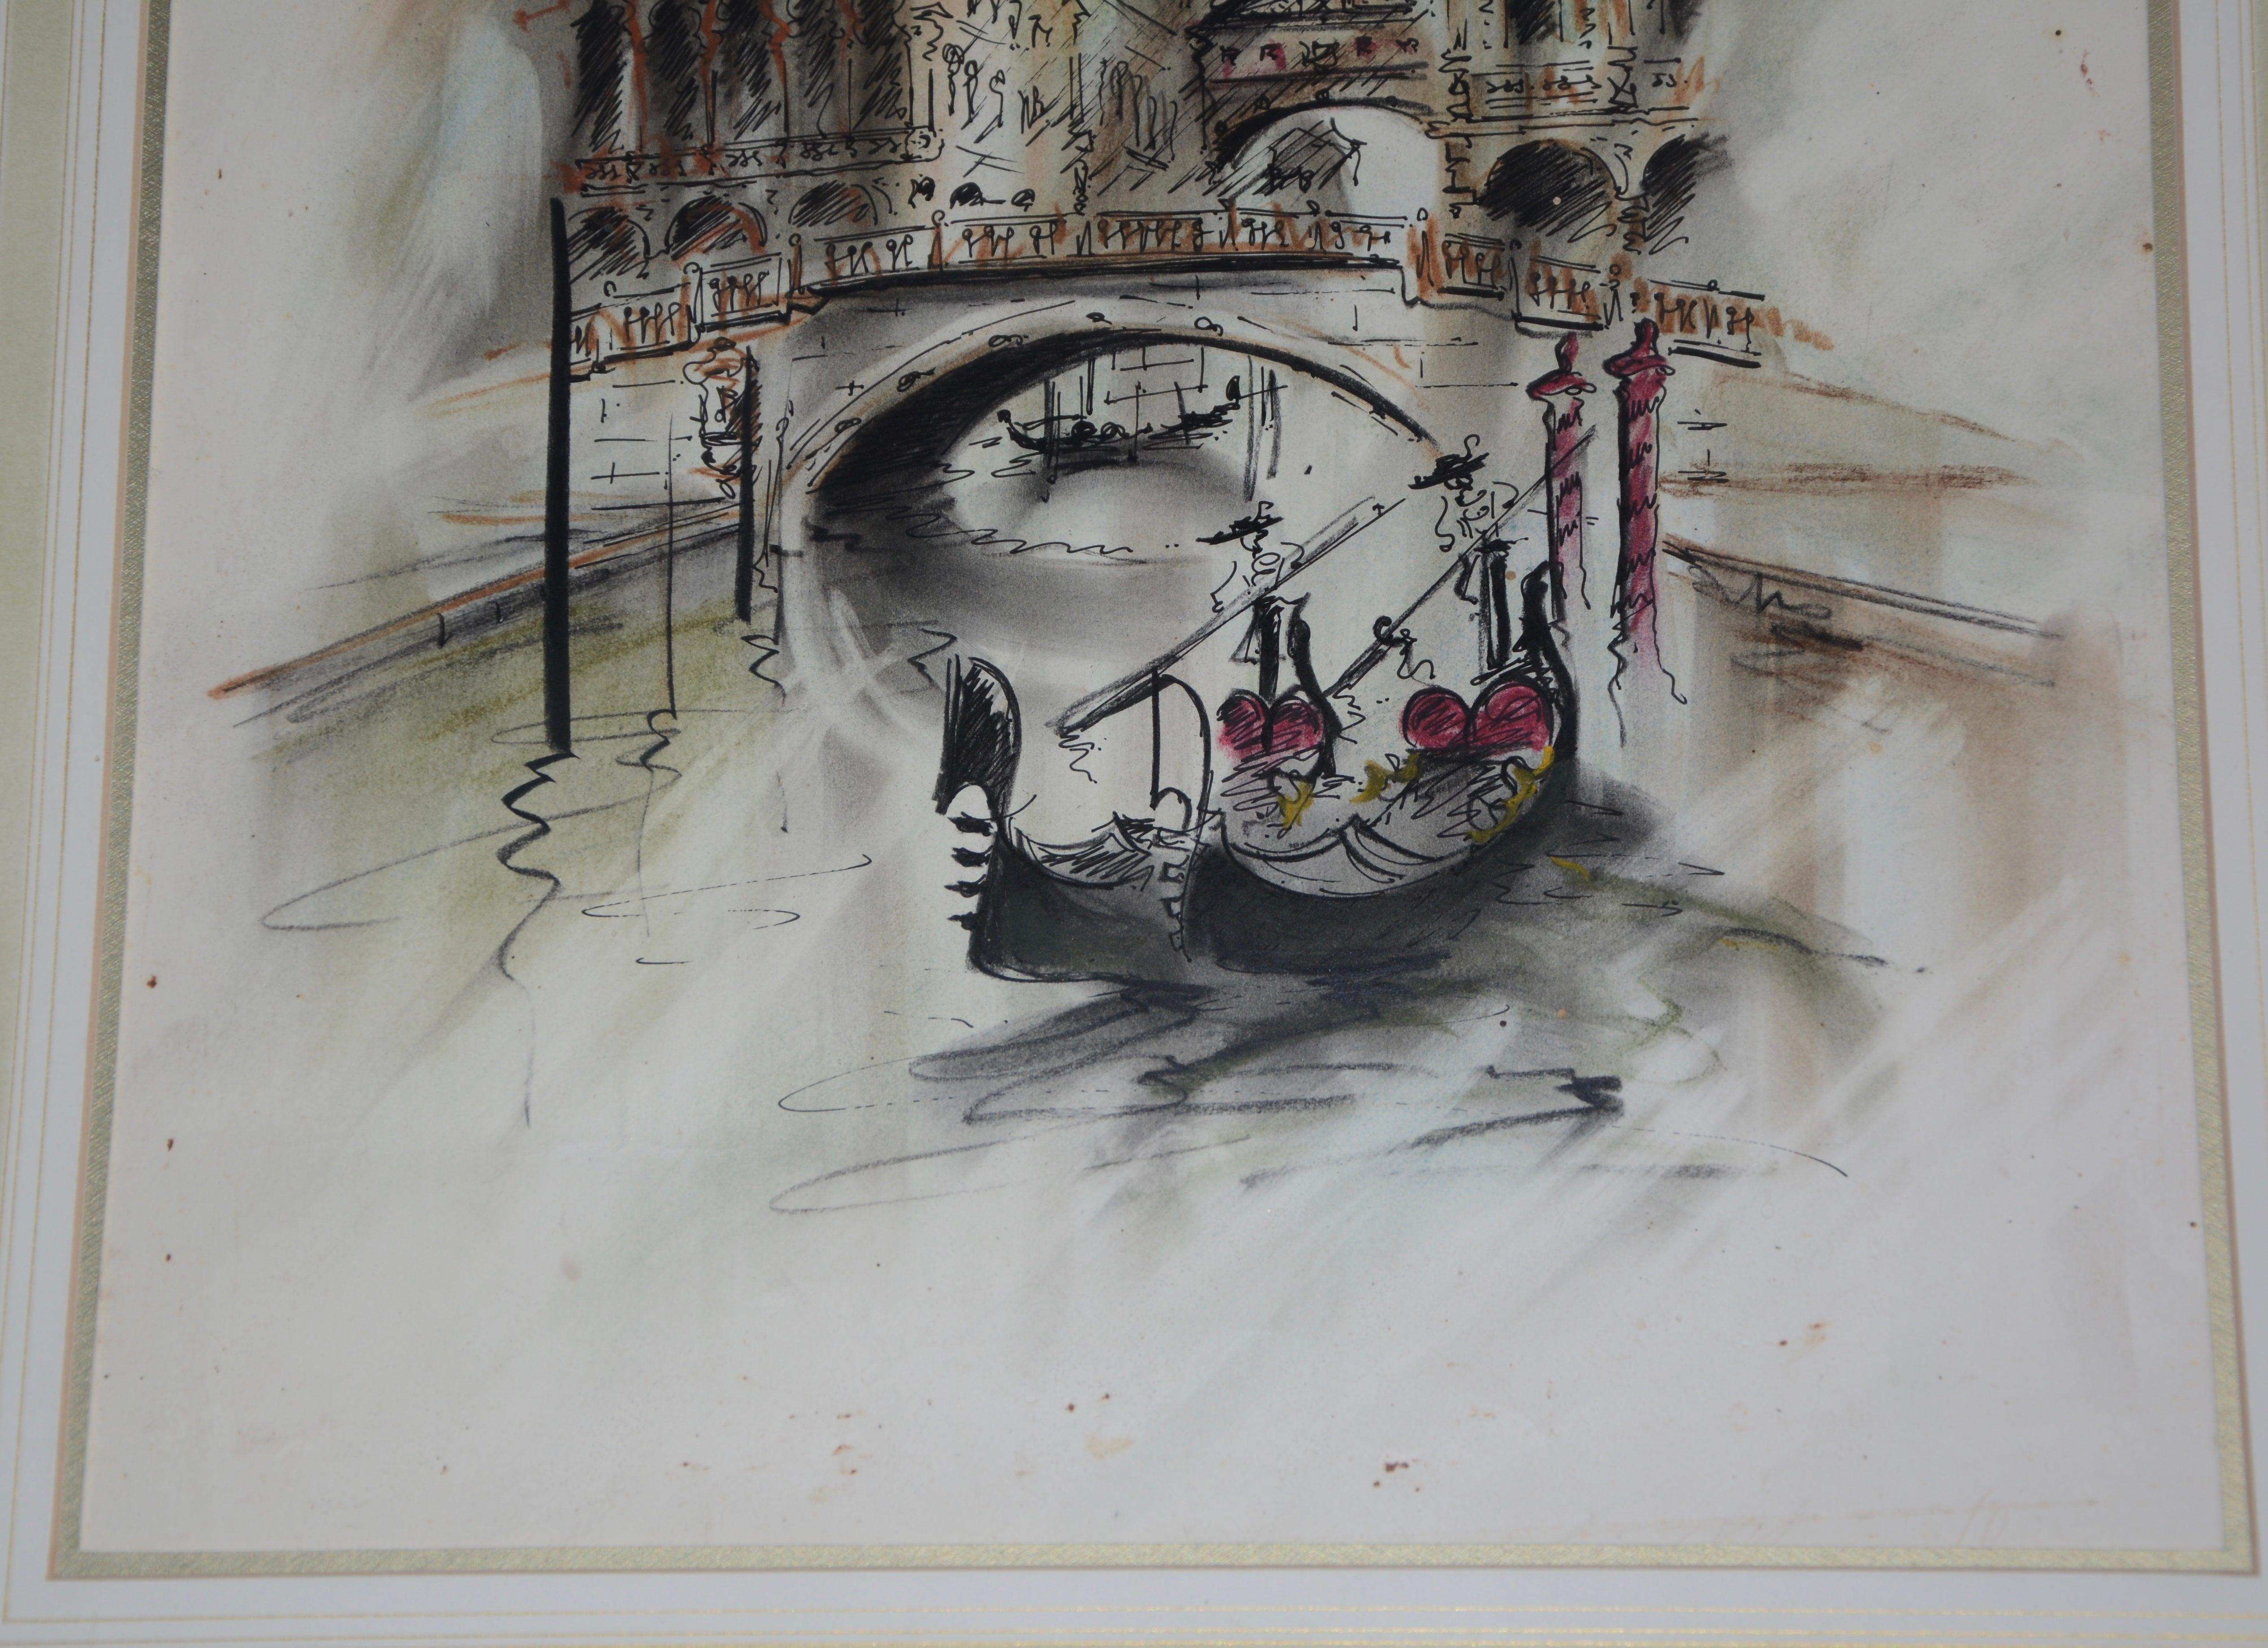 This lovely watercolor showcases the waters of Venice with boaters slowly floating along. The buildings in the background add to the beauty of the painting. The piece is artist-signed on the bottom right corner but we could not identify the artist.